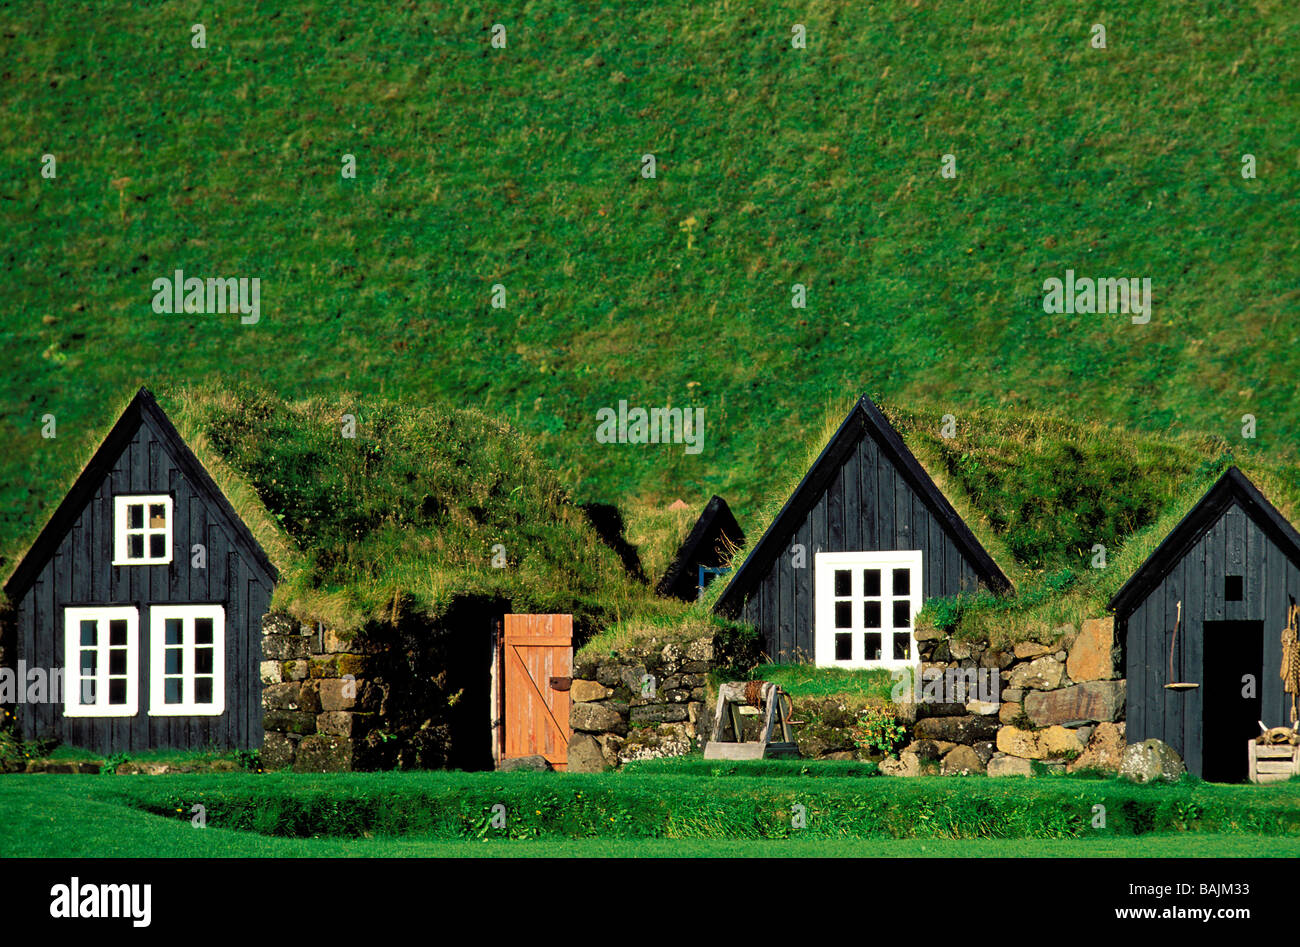 Iceland, Skógar old traditional farms with grass roof Stock Photo